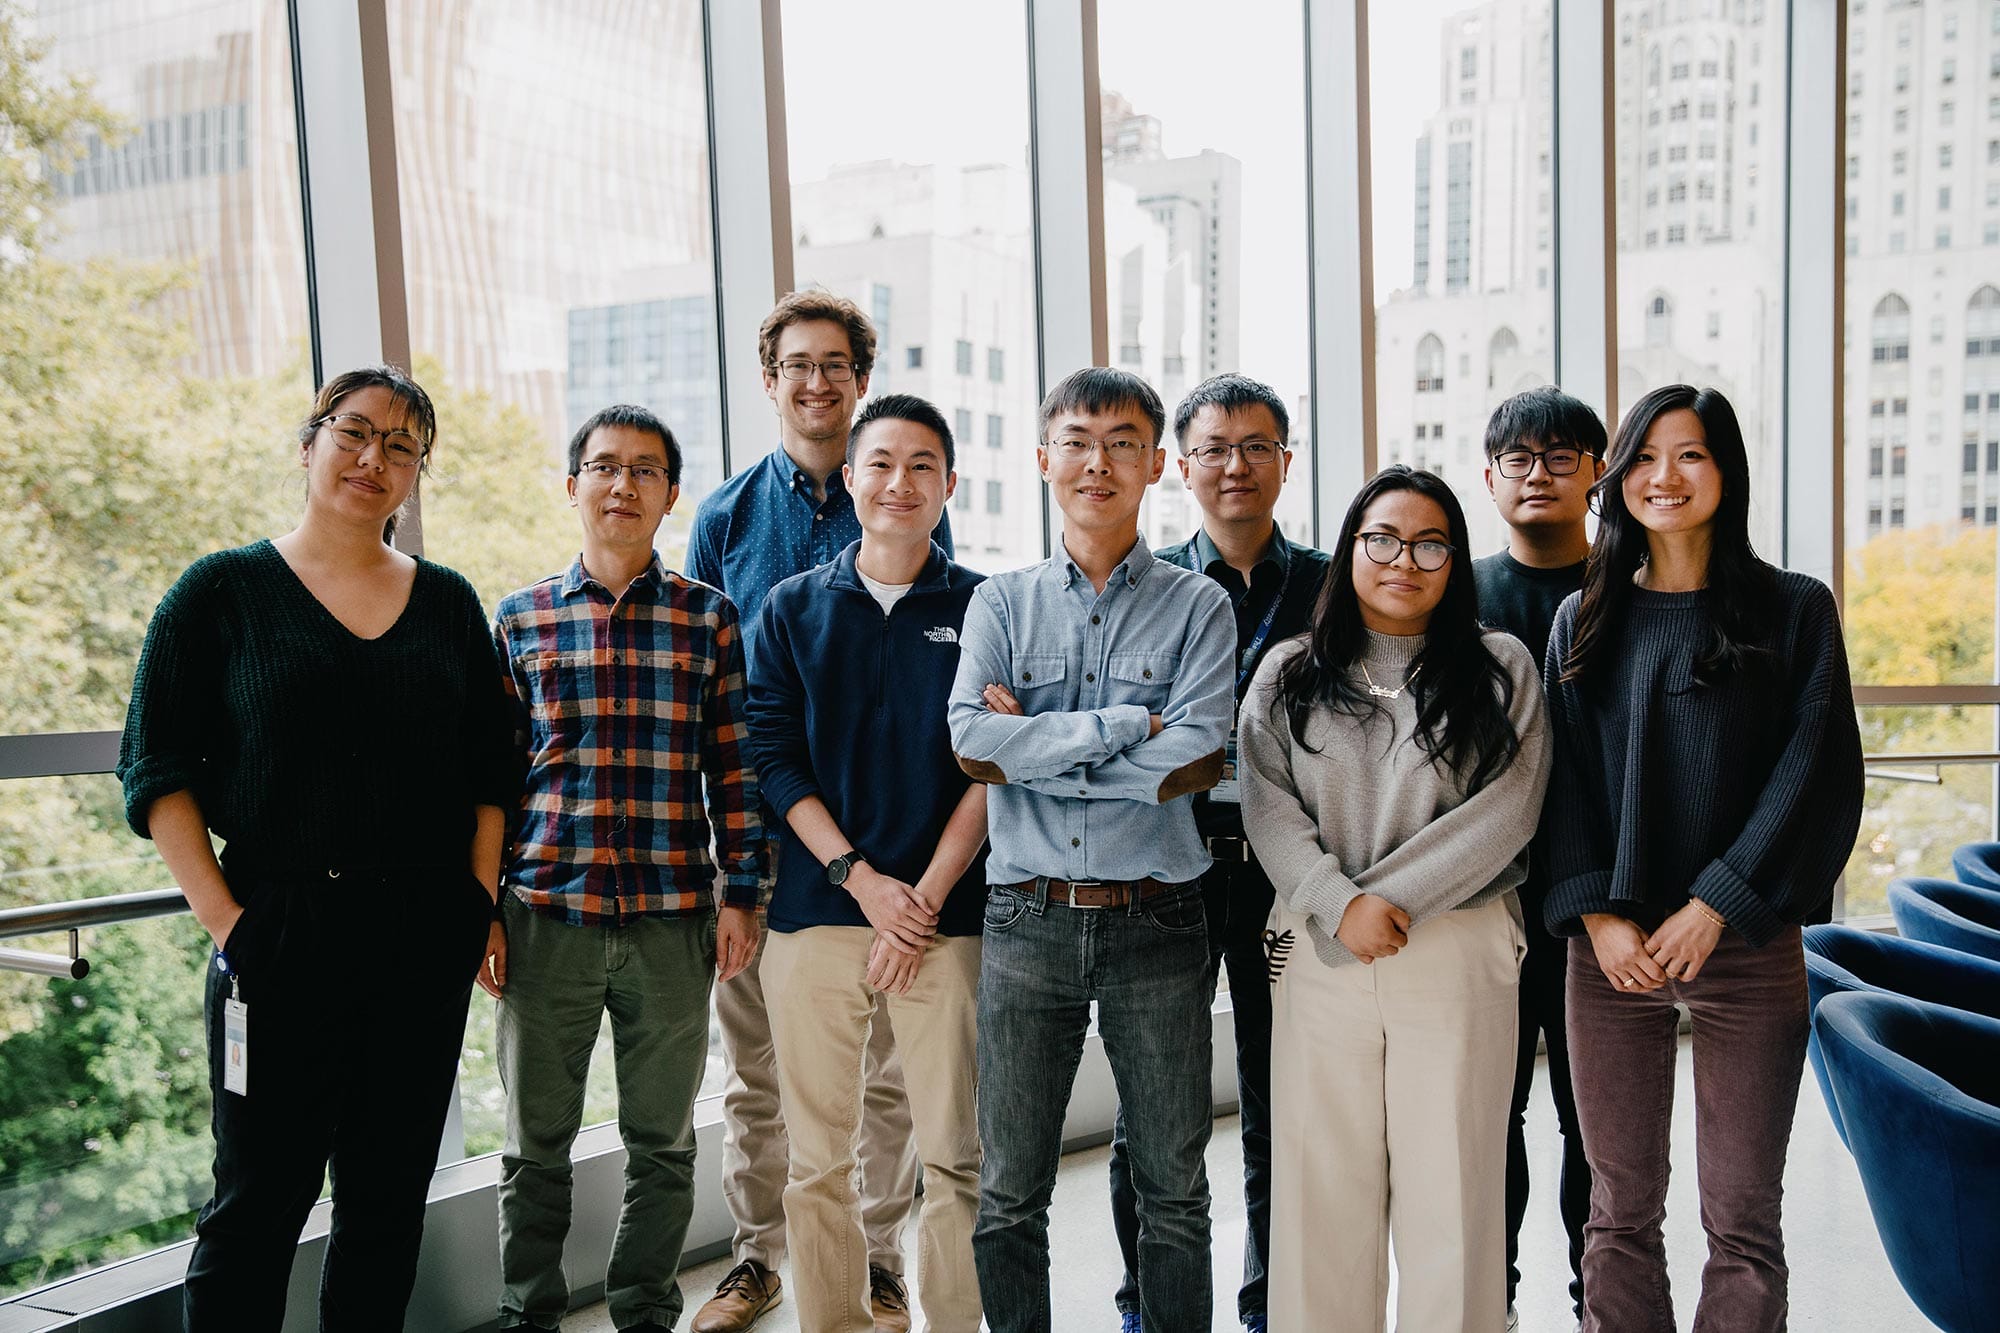 A group photo of Shixin Liu's lab in front of a wall of windows.